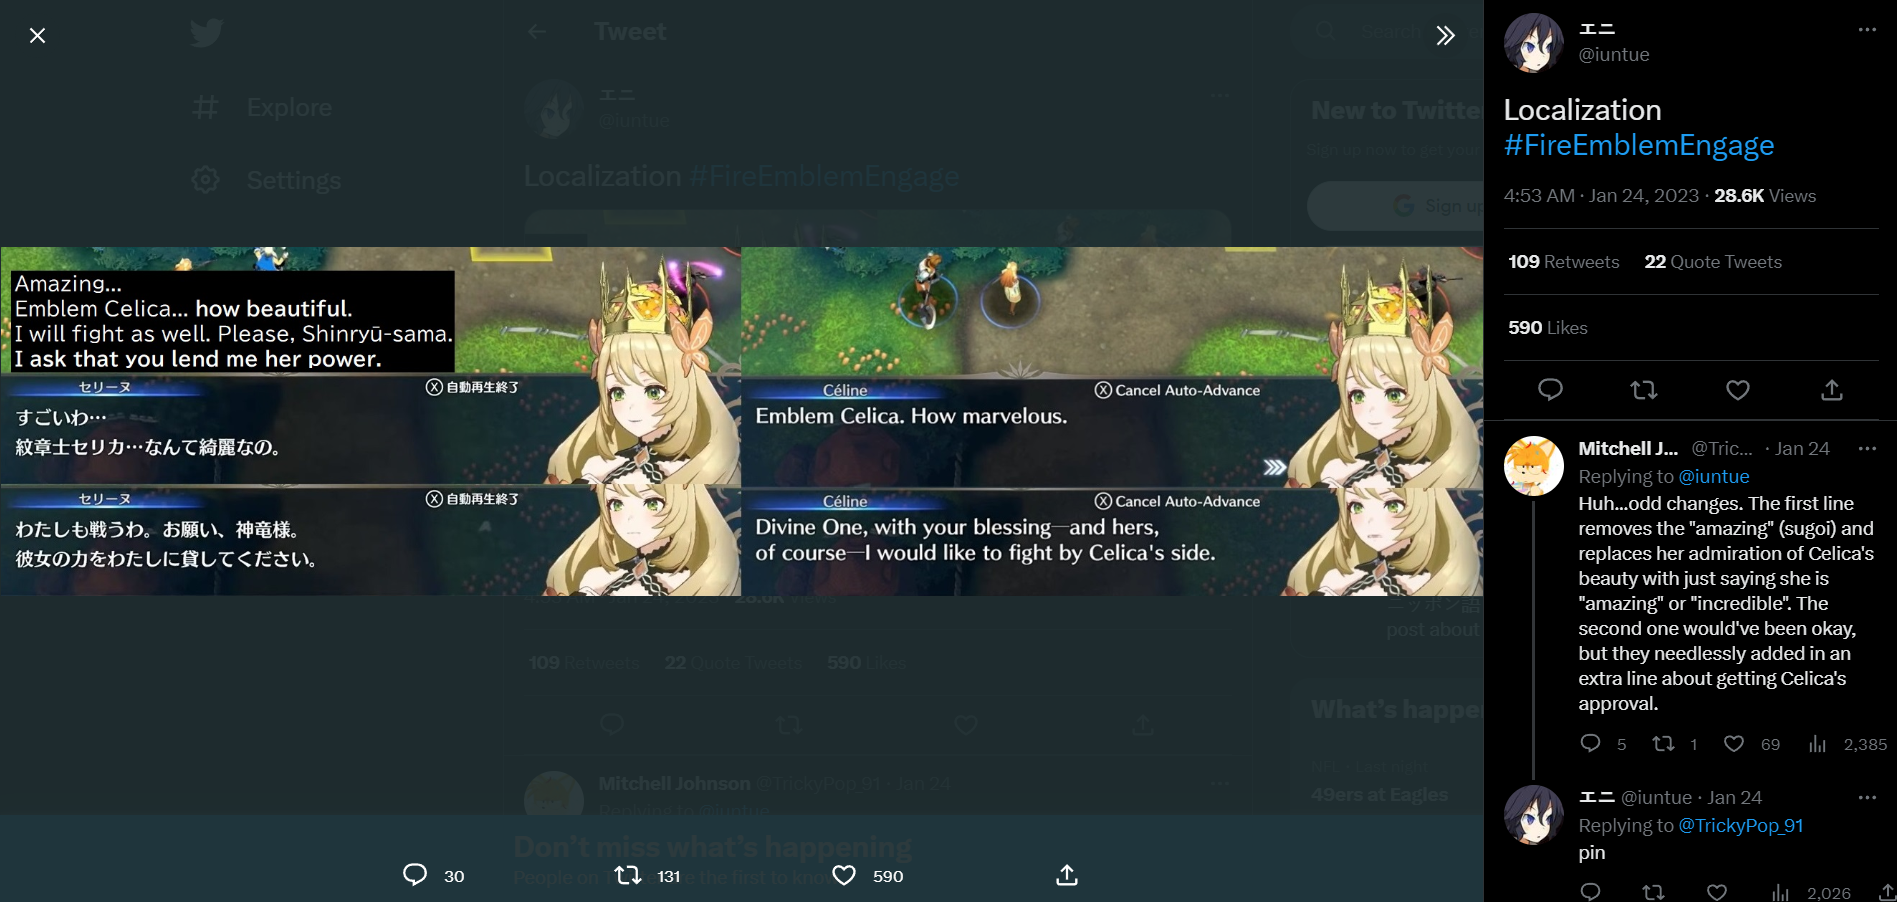 iuntue highlights how Fire Emblem Engage censors a female character being praised for her beauty in the English localization via Twitter